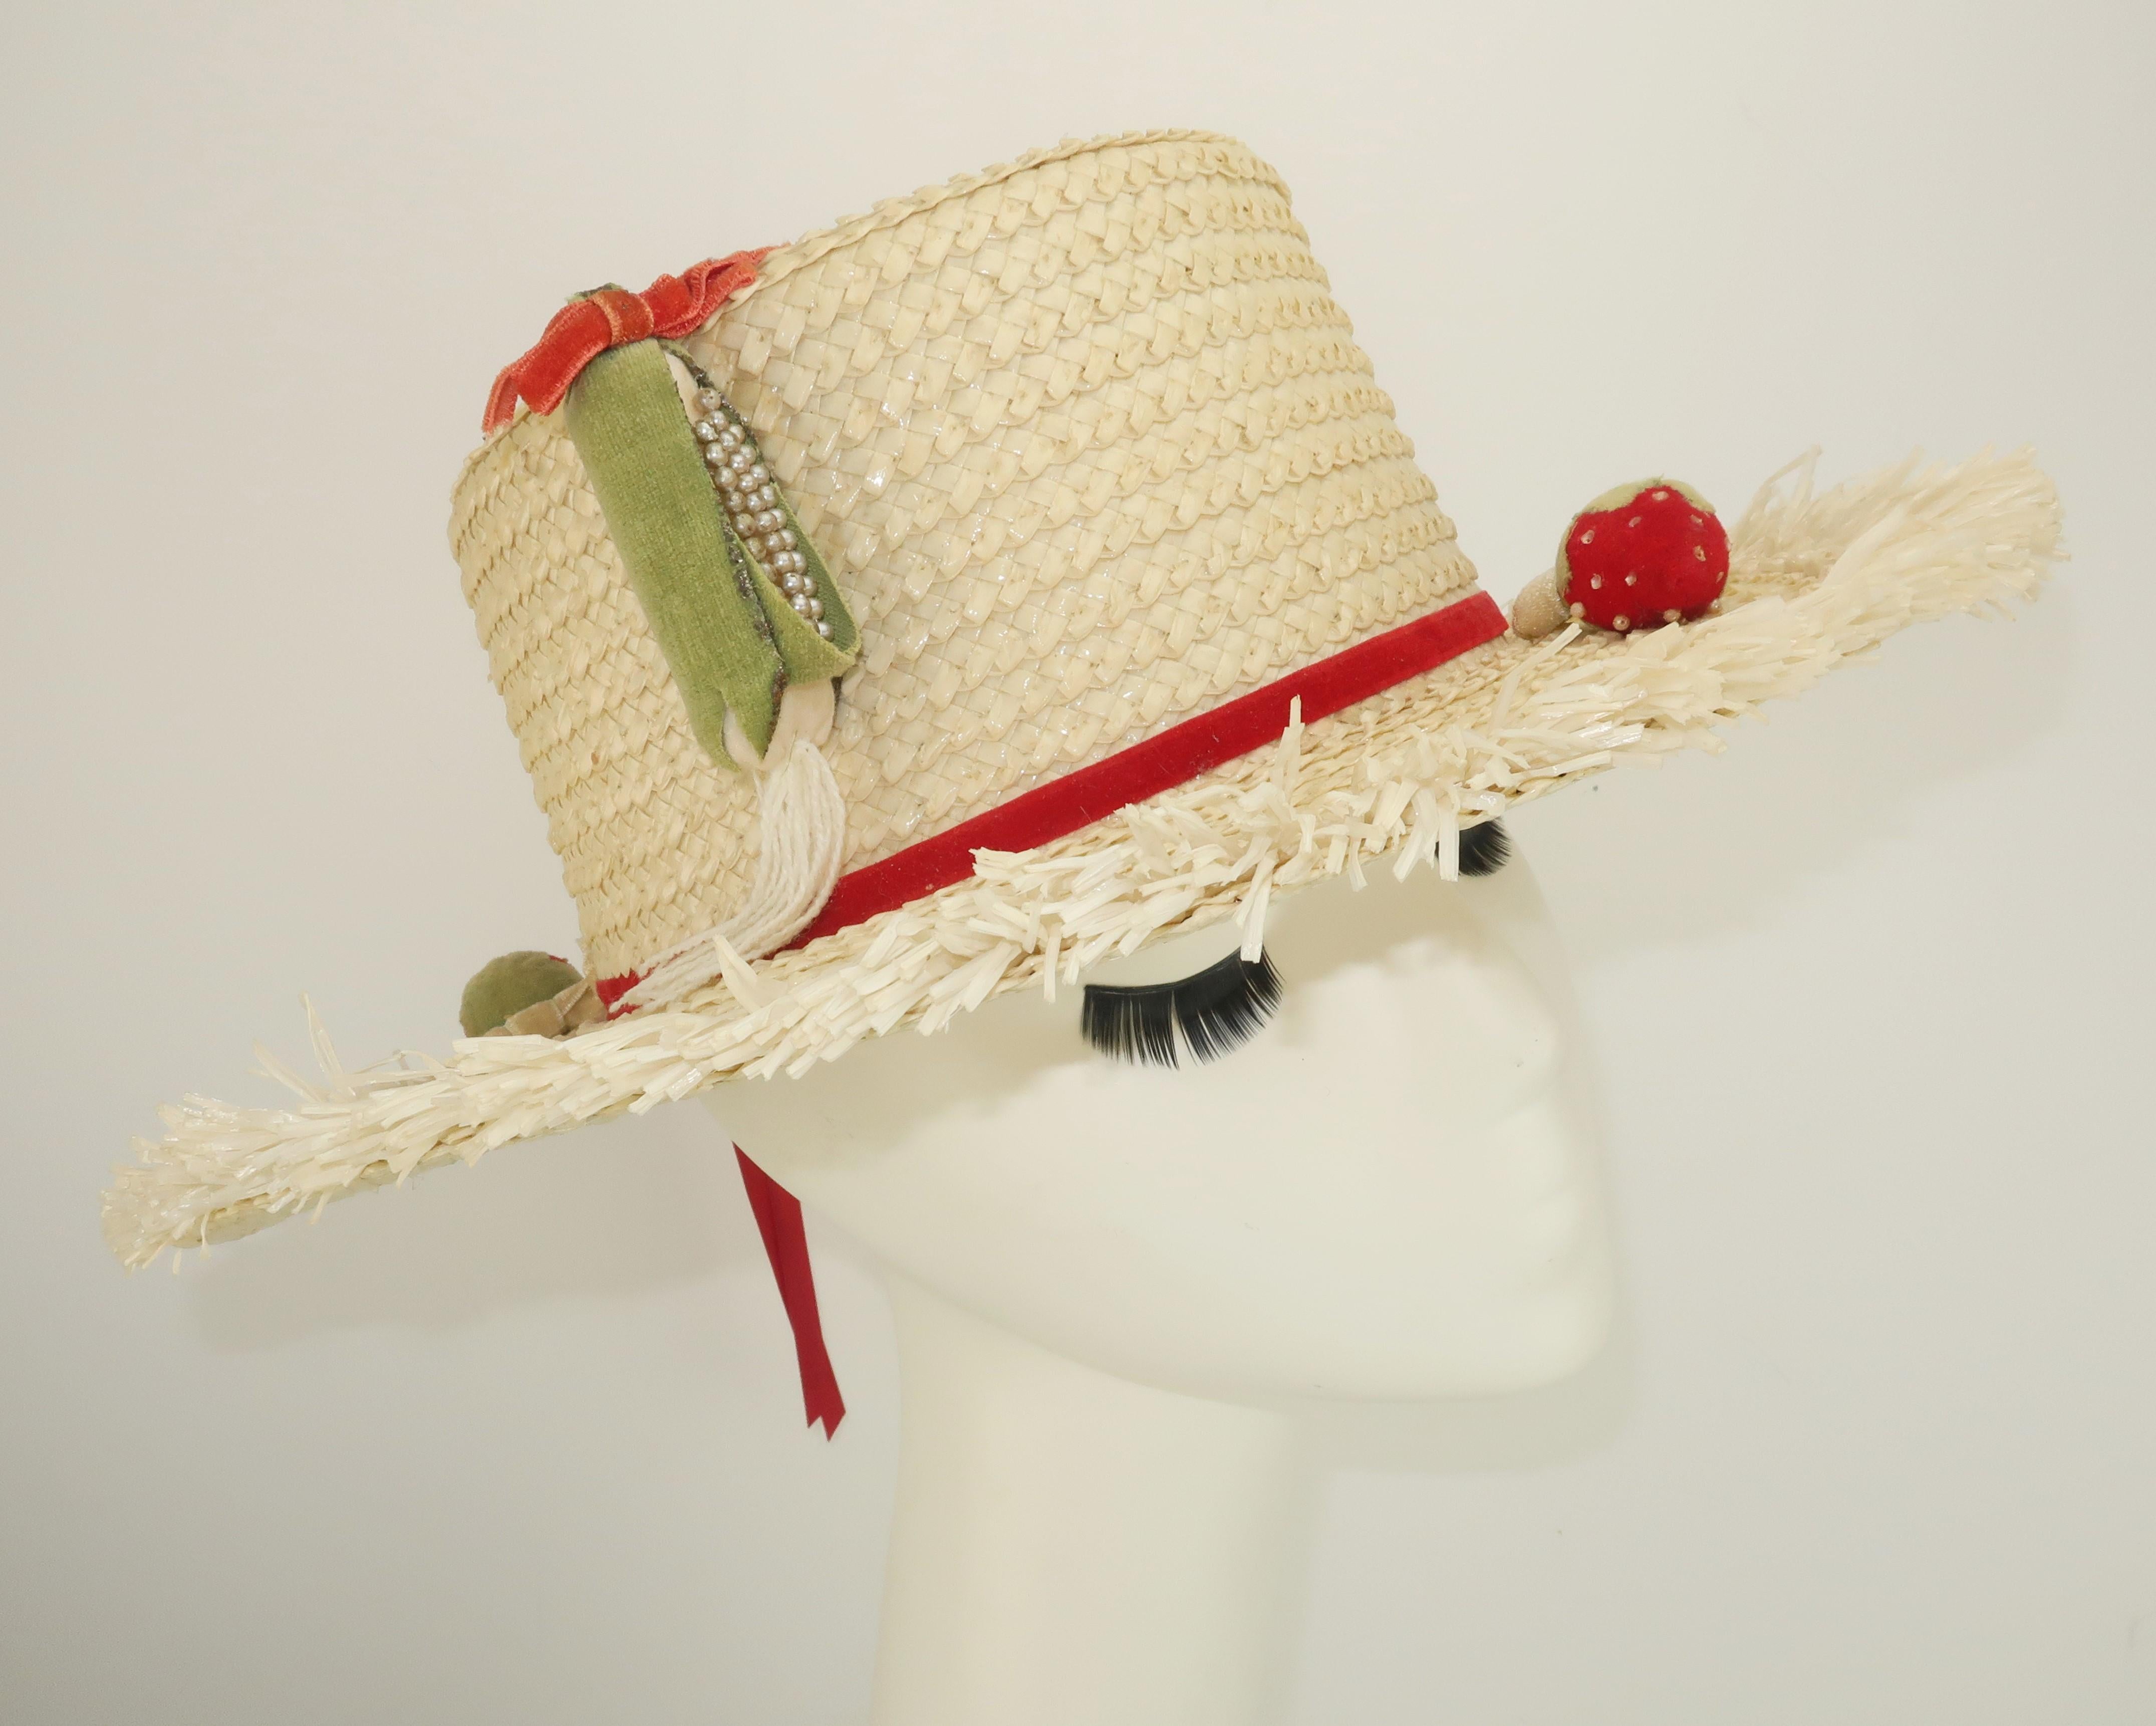 A blast from the 1950's Floridian past ... a vanilla white straw hat with a raffia trimmed brim and velvet decorations including strawberries and miniature corn cobs accented by pearl beads.  Novelty hats are a fun way to add a vintage touch to a